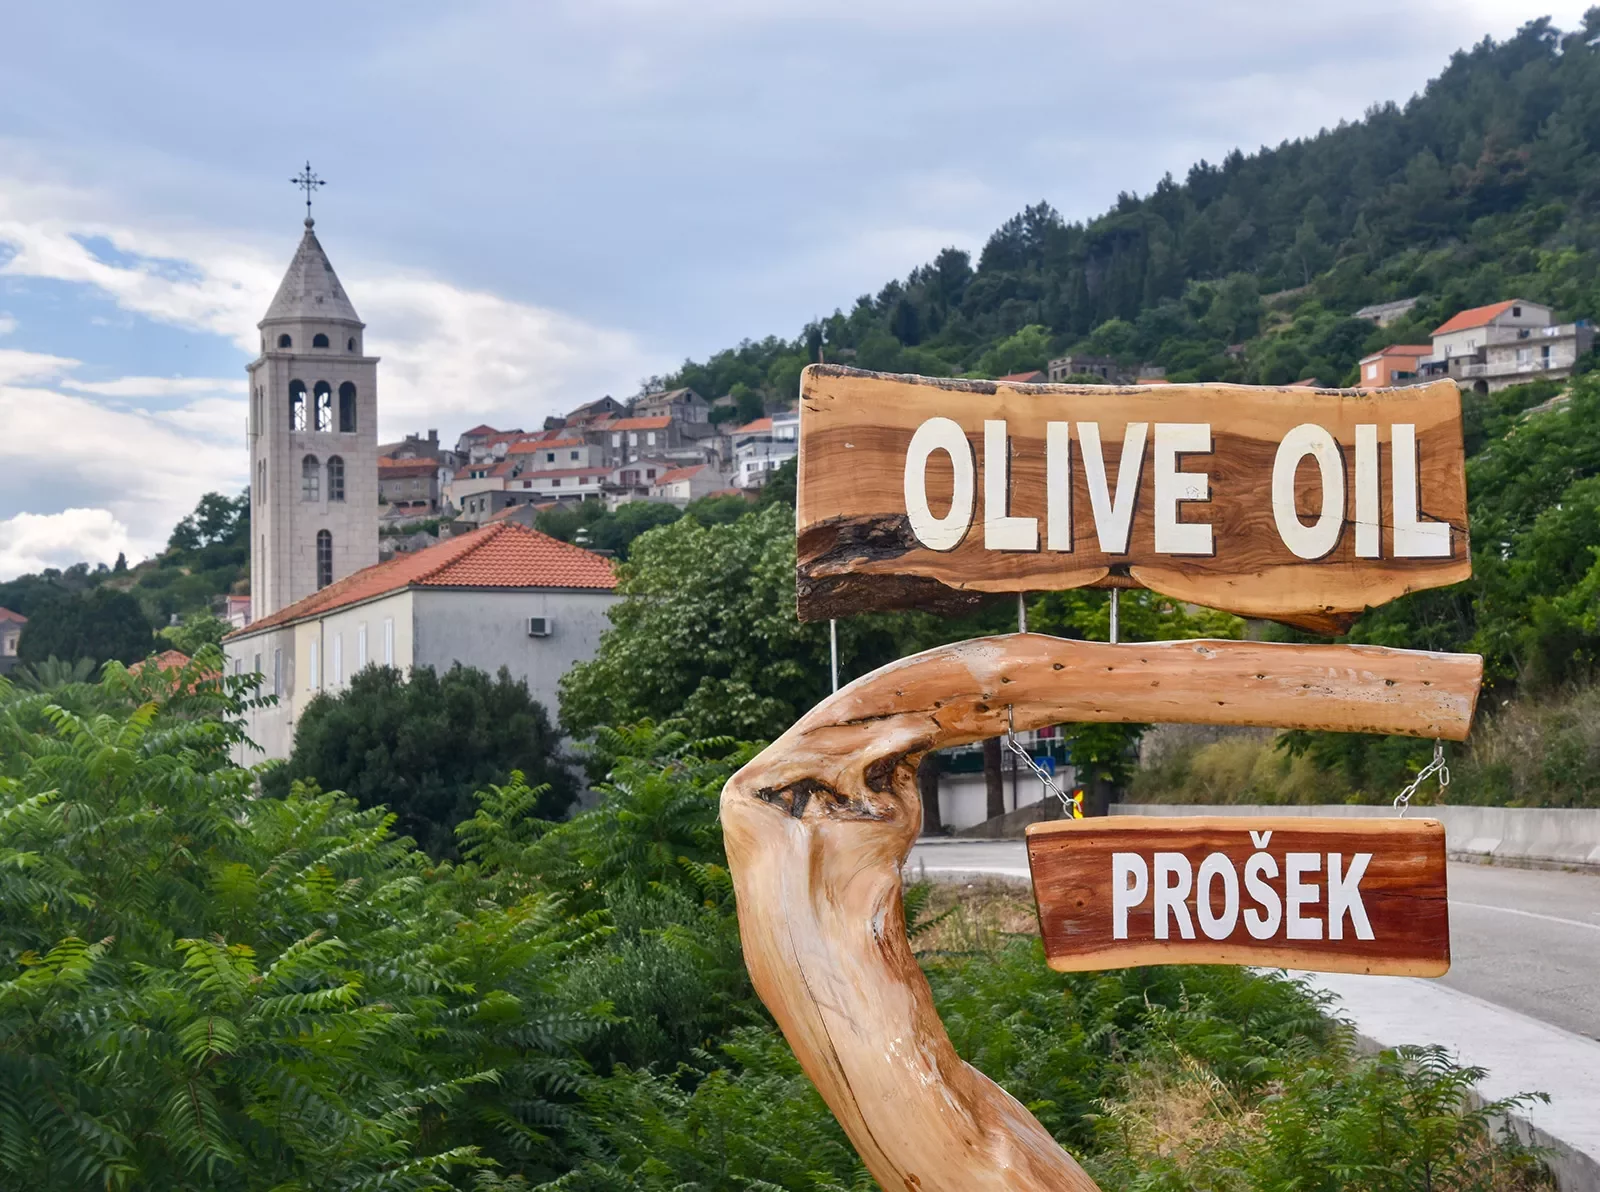 Shot of Croatian hillside town, Prosek, and 'Olive Oil&quot; sign.